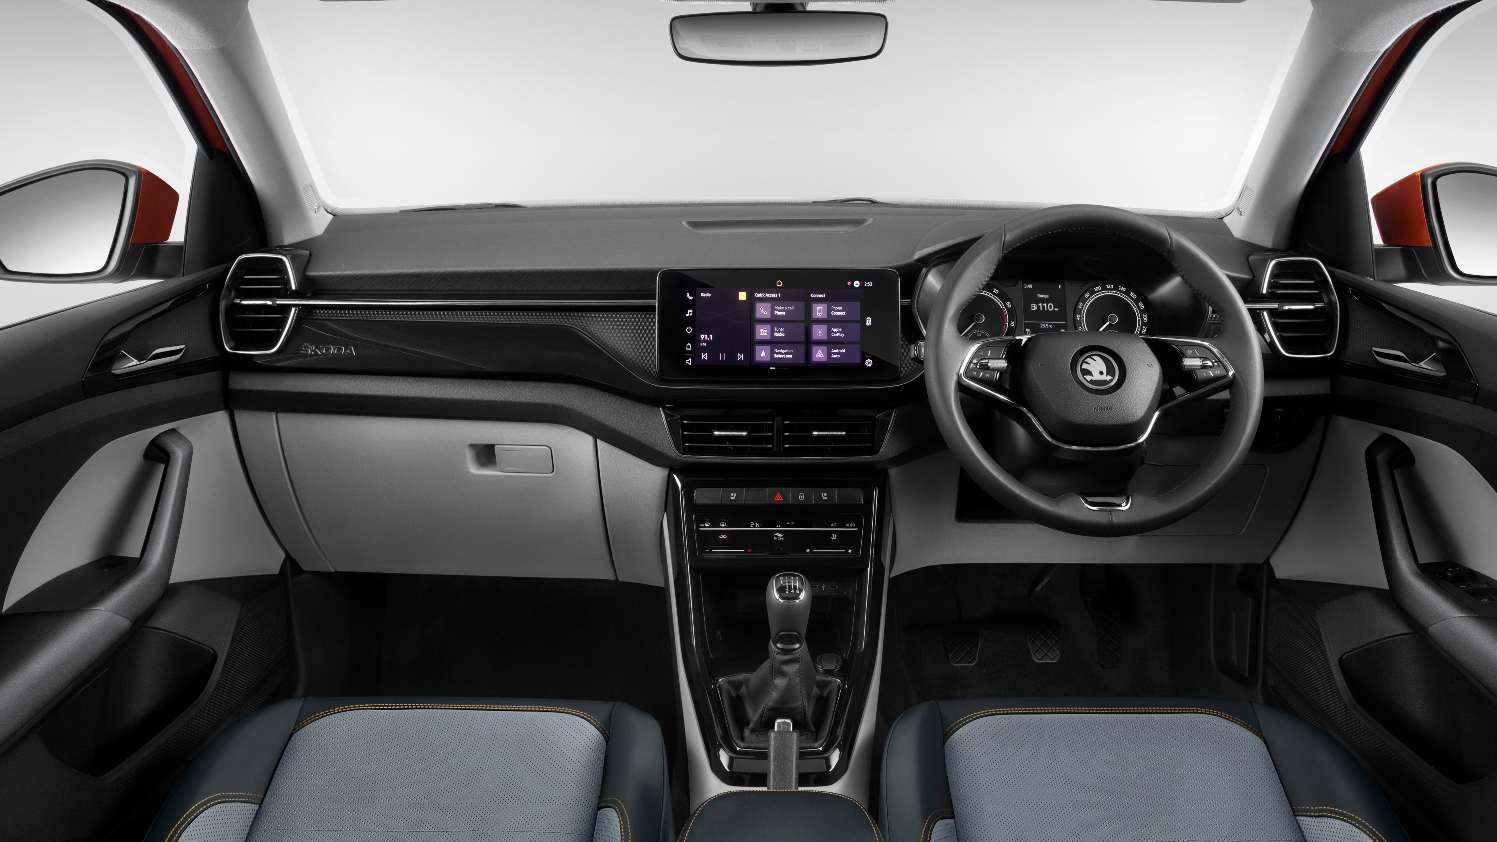 Ambition and Style versions of the 10-inch touch screen. Base Active gets a 7.0 inch unit.Image: Skoda